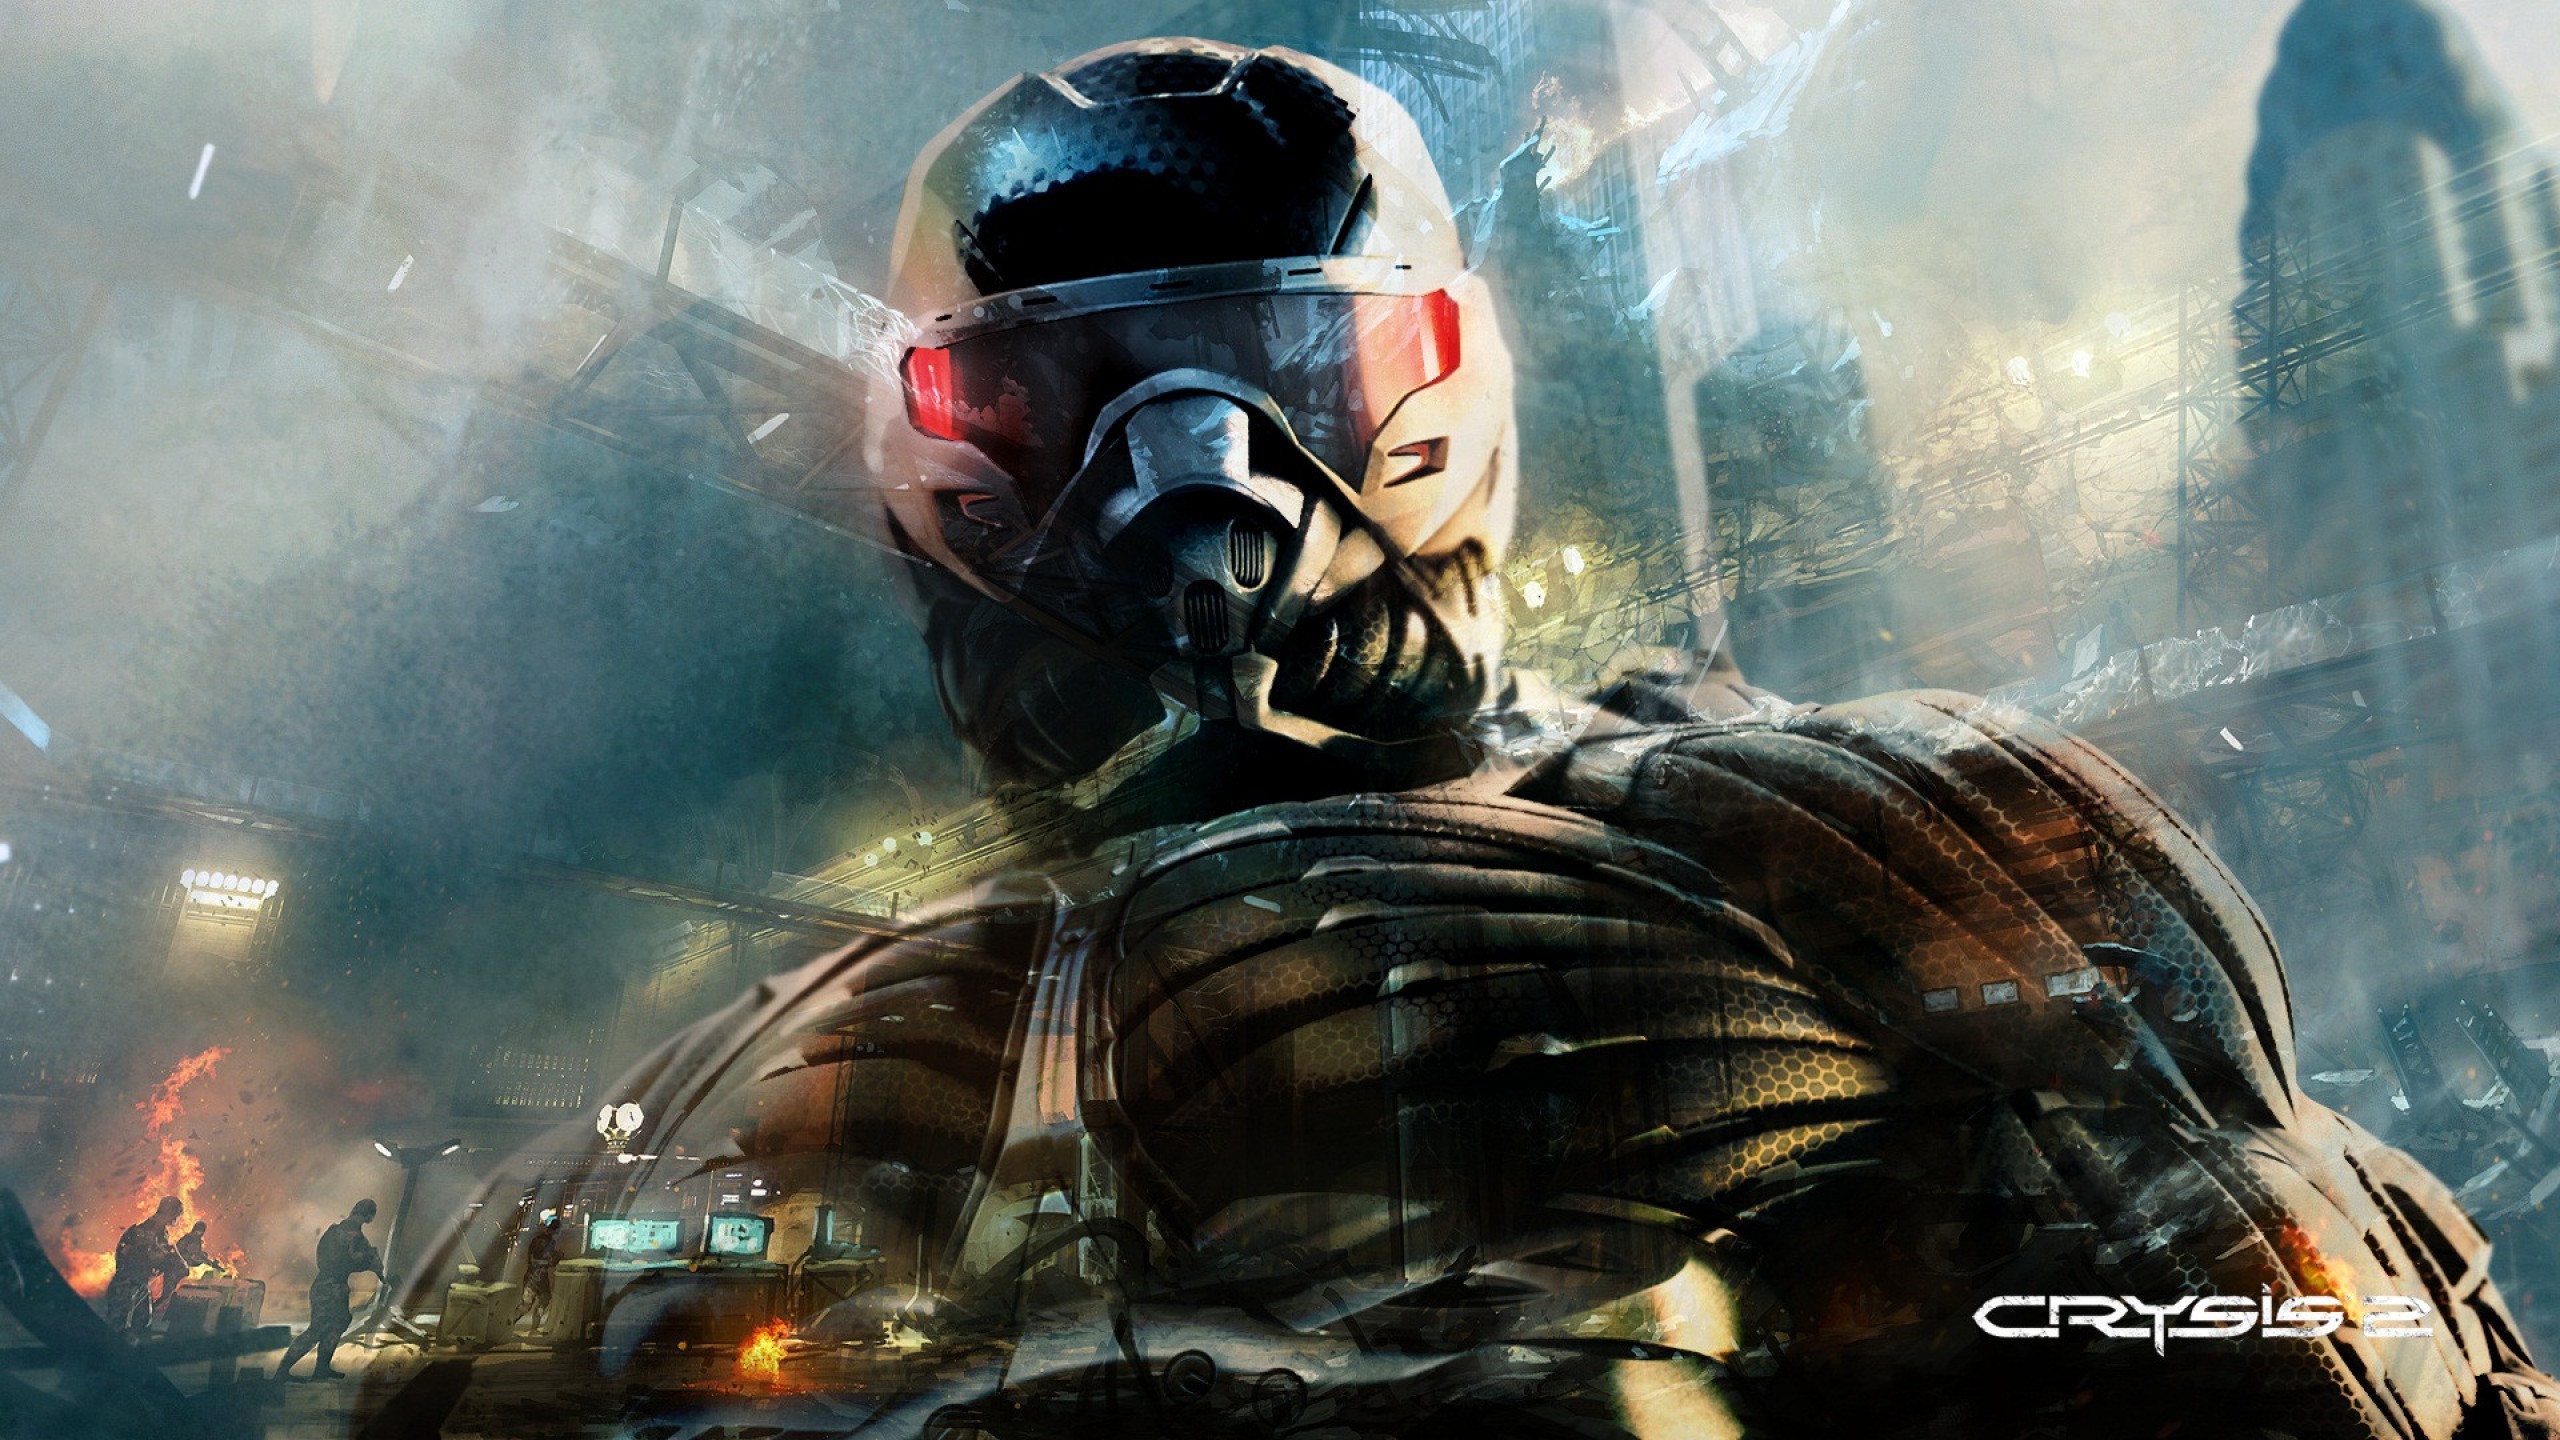 Wallpaper Crysis 3 game 2013 2560x1600 HD Picture Image